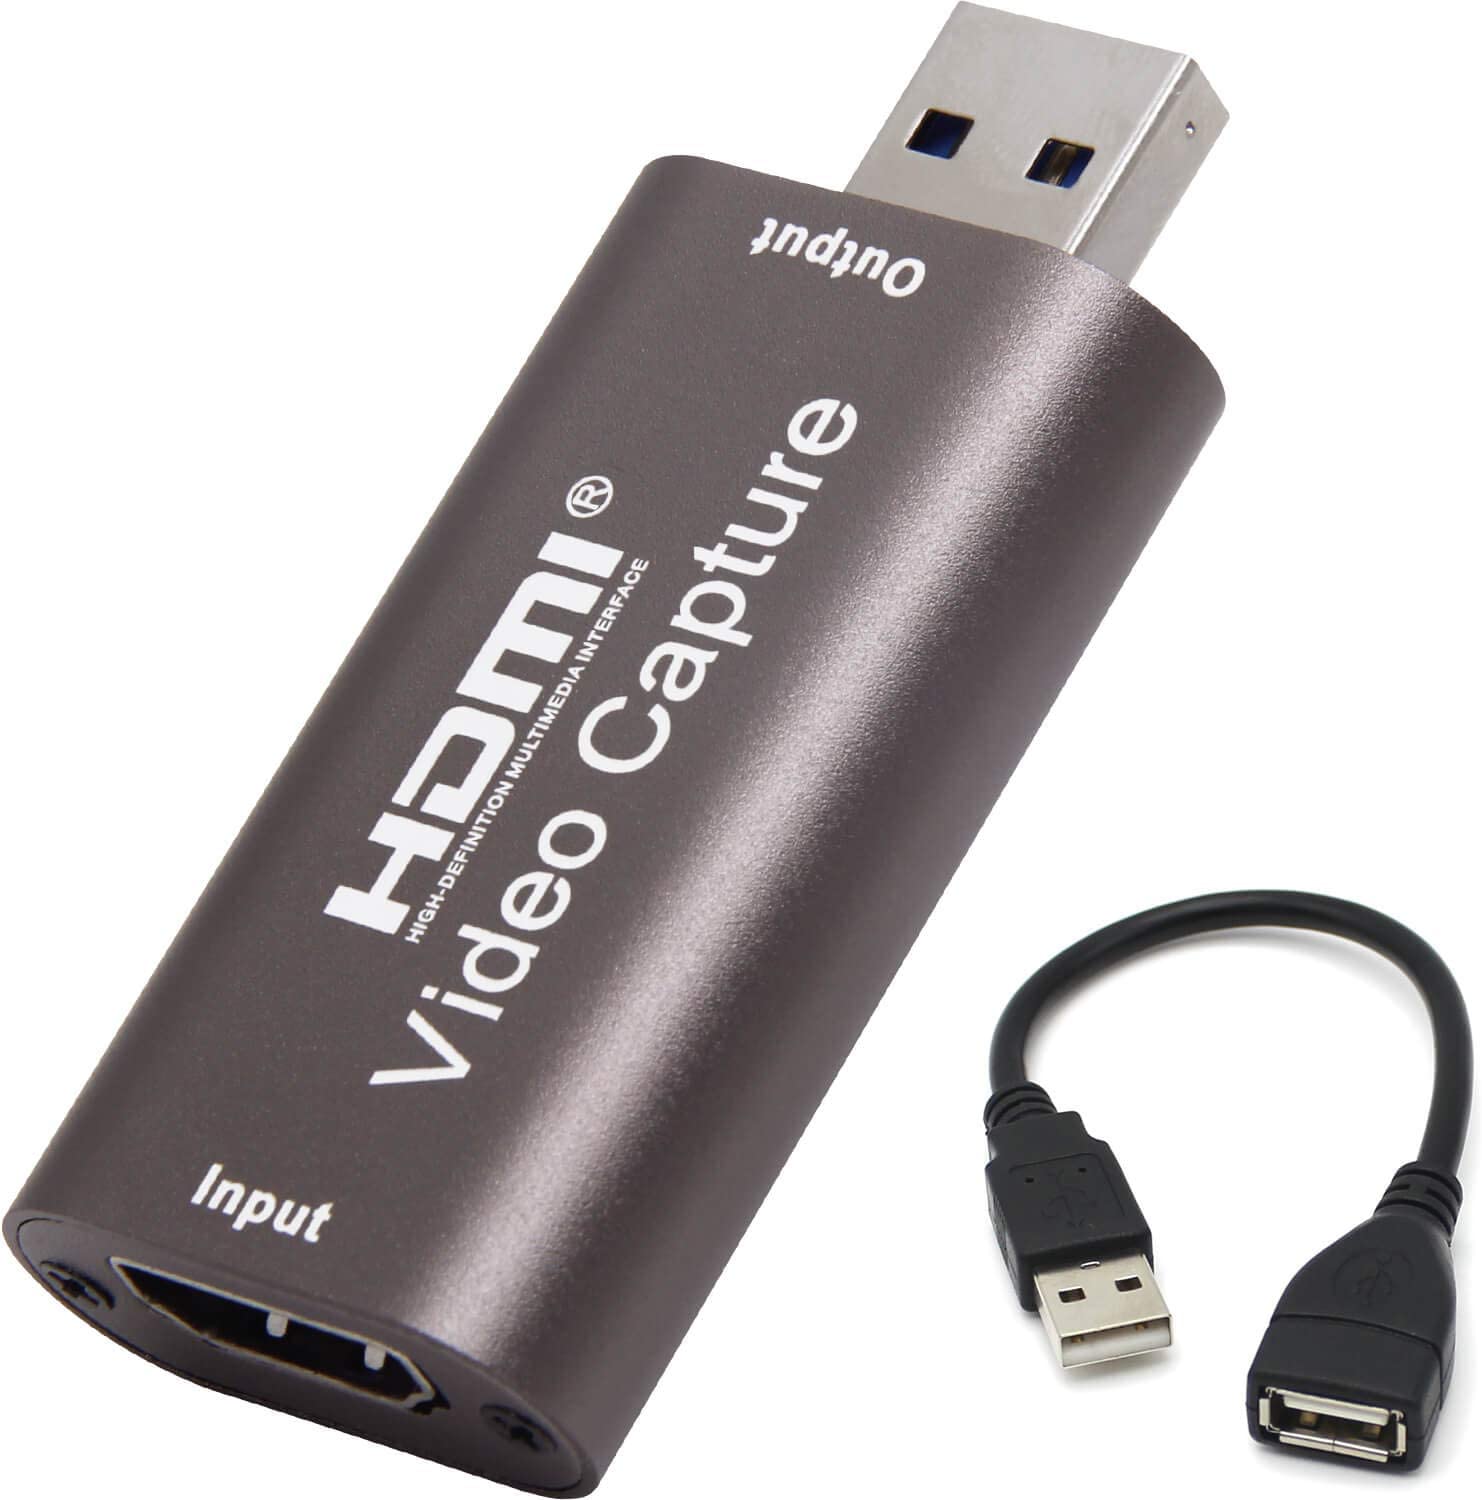 HDMI Video Capture with cable